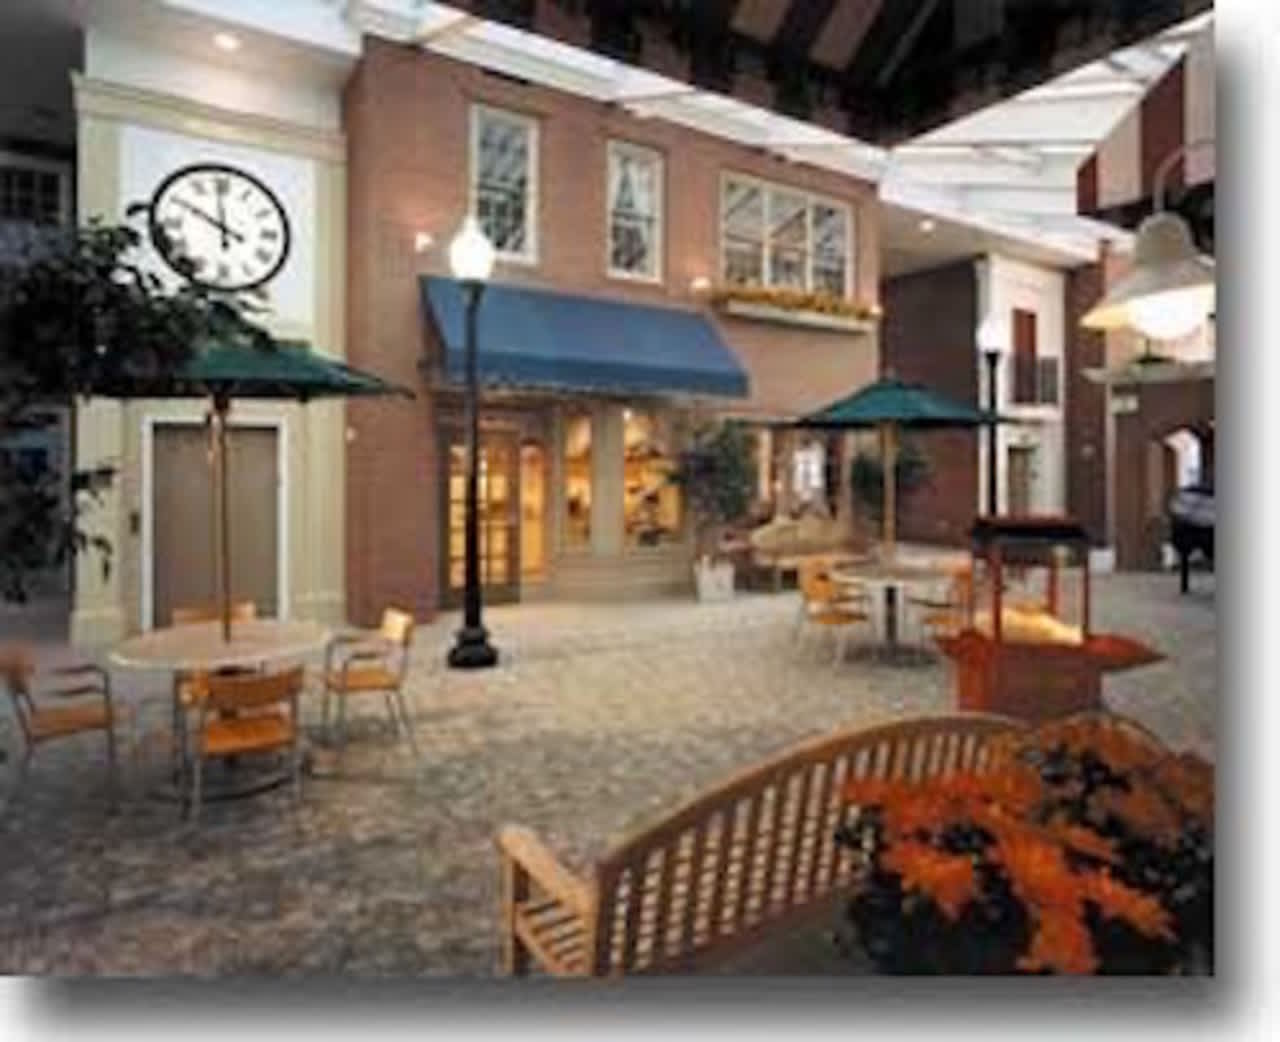 New Canaan's The Village of Waveny has been named one of the top assisted-living facilities by SeniorAdvisor.com.